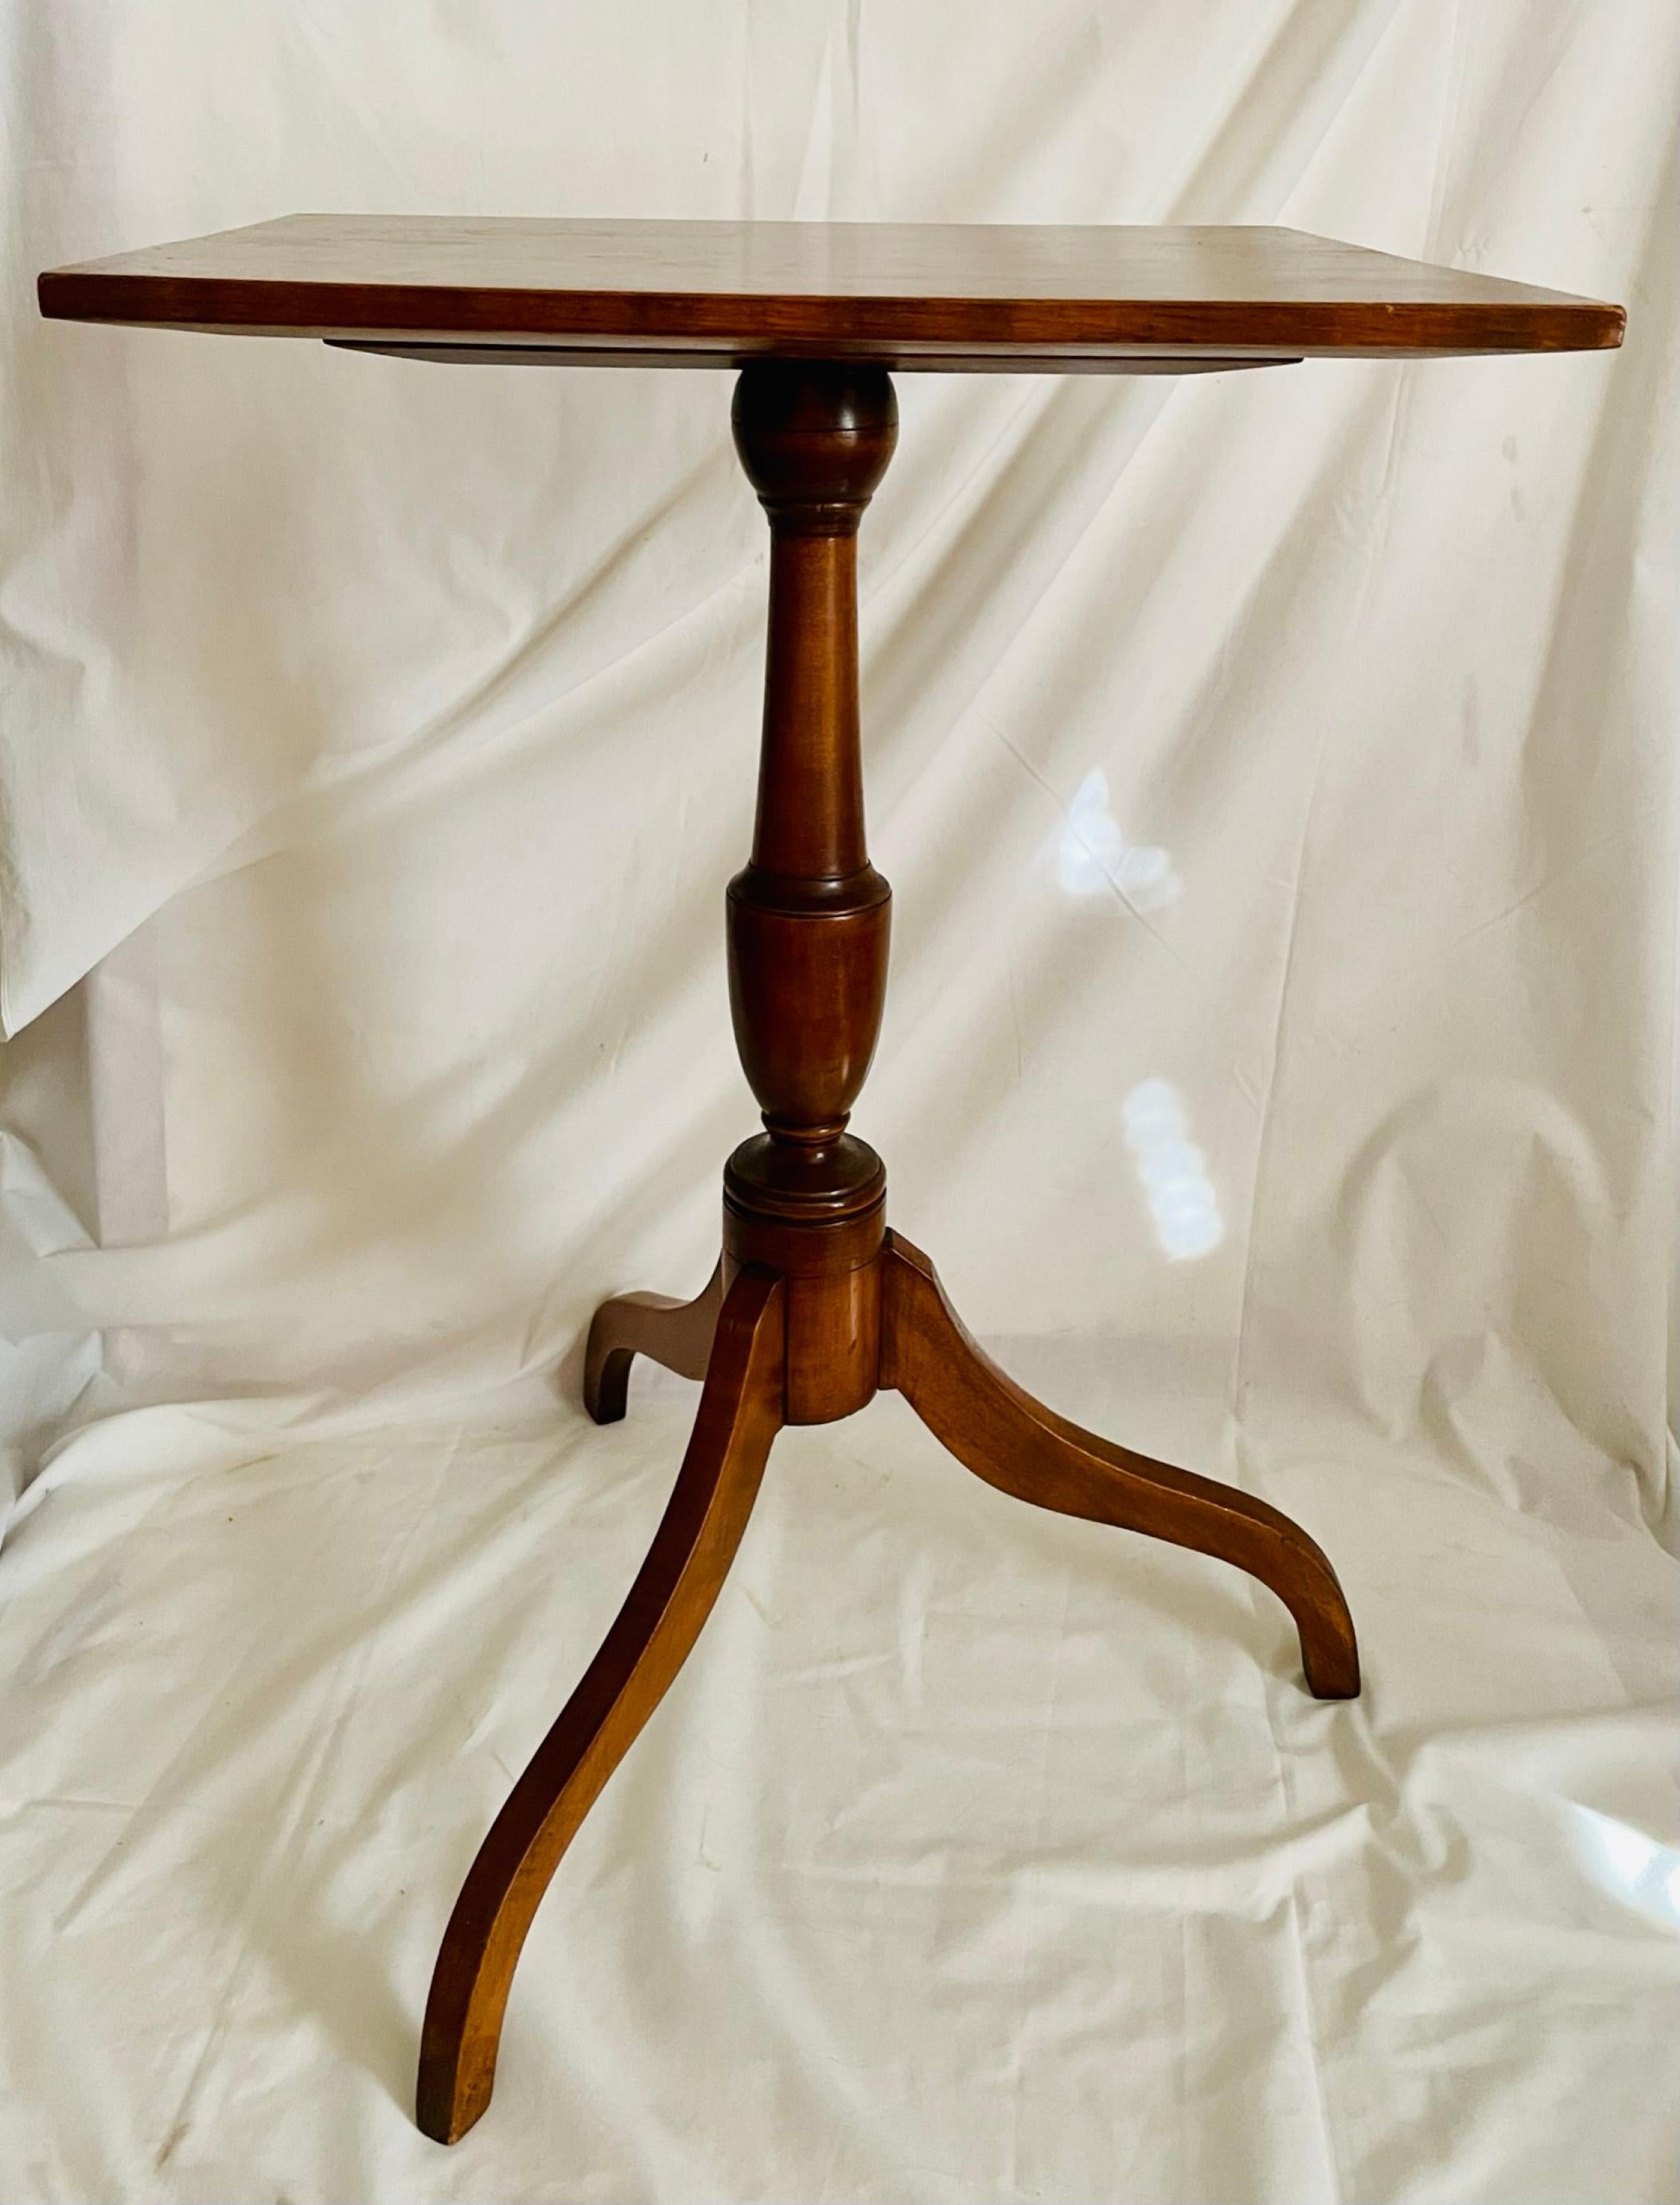 19th Century Federal Style Pedestal Side Table

This antique American square shaped top wood pedestal side table stands on three legs. The legs are attached with mortise joinery to the turned pedestal. A mounting plate with slotted screws is